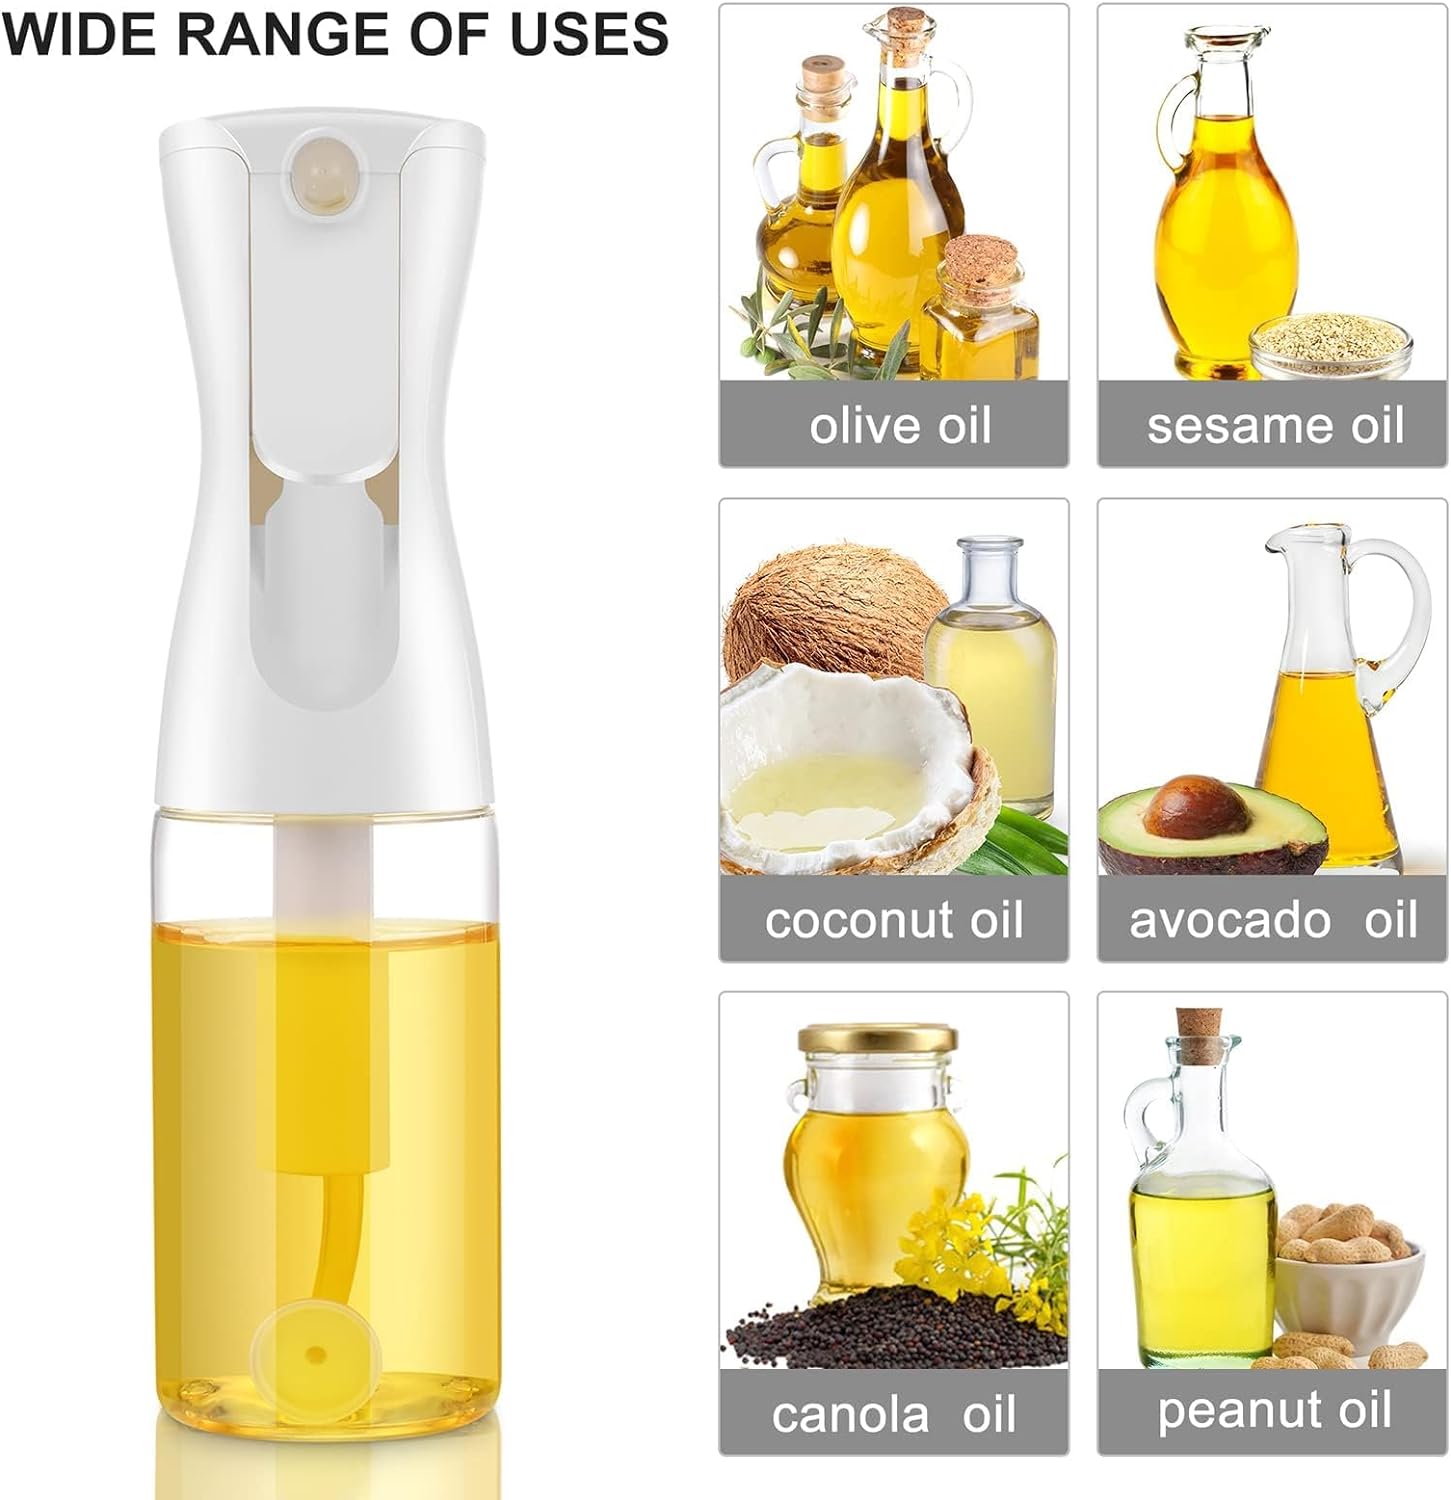 Oil Sprayer for Cooking, 200ml Olive Oil Sprayer Mister, Olive Oil Spray Bottle, Kitchen Gadgets Accessories for Air Fryer, Canola Oil Spritzer, Widely Used for Salad Making, Baking, Frying, BBQ